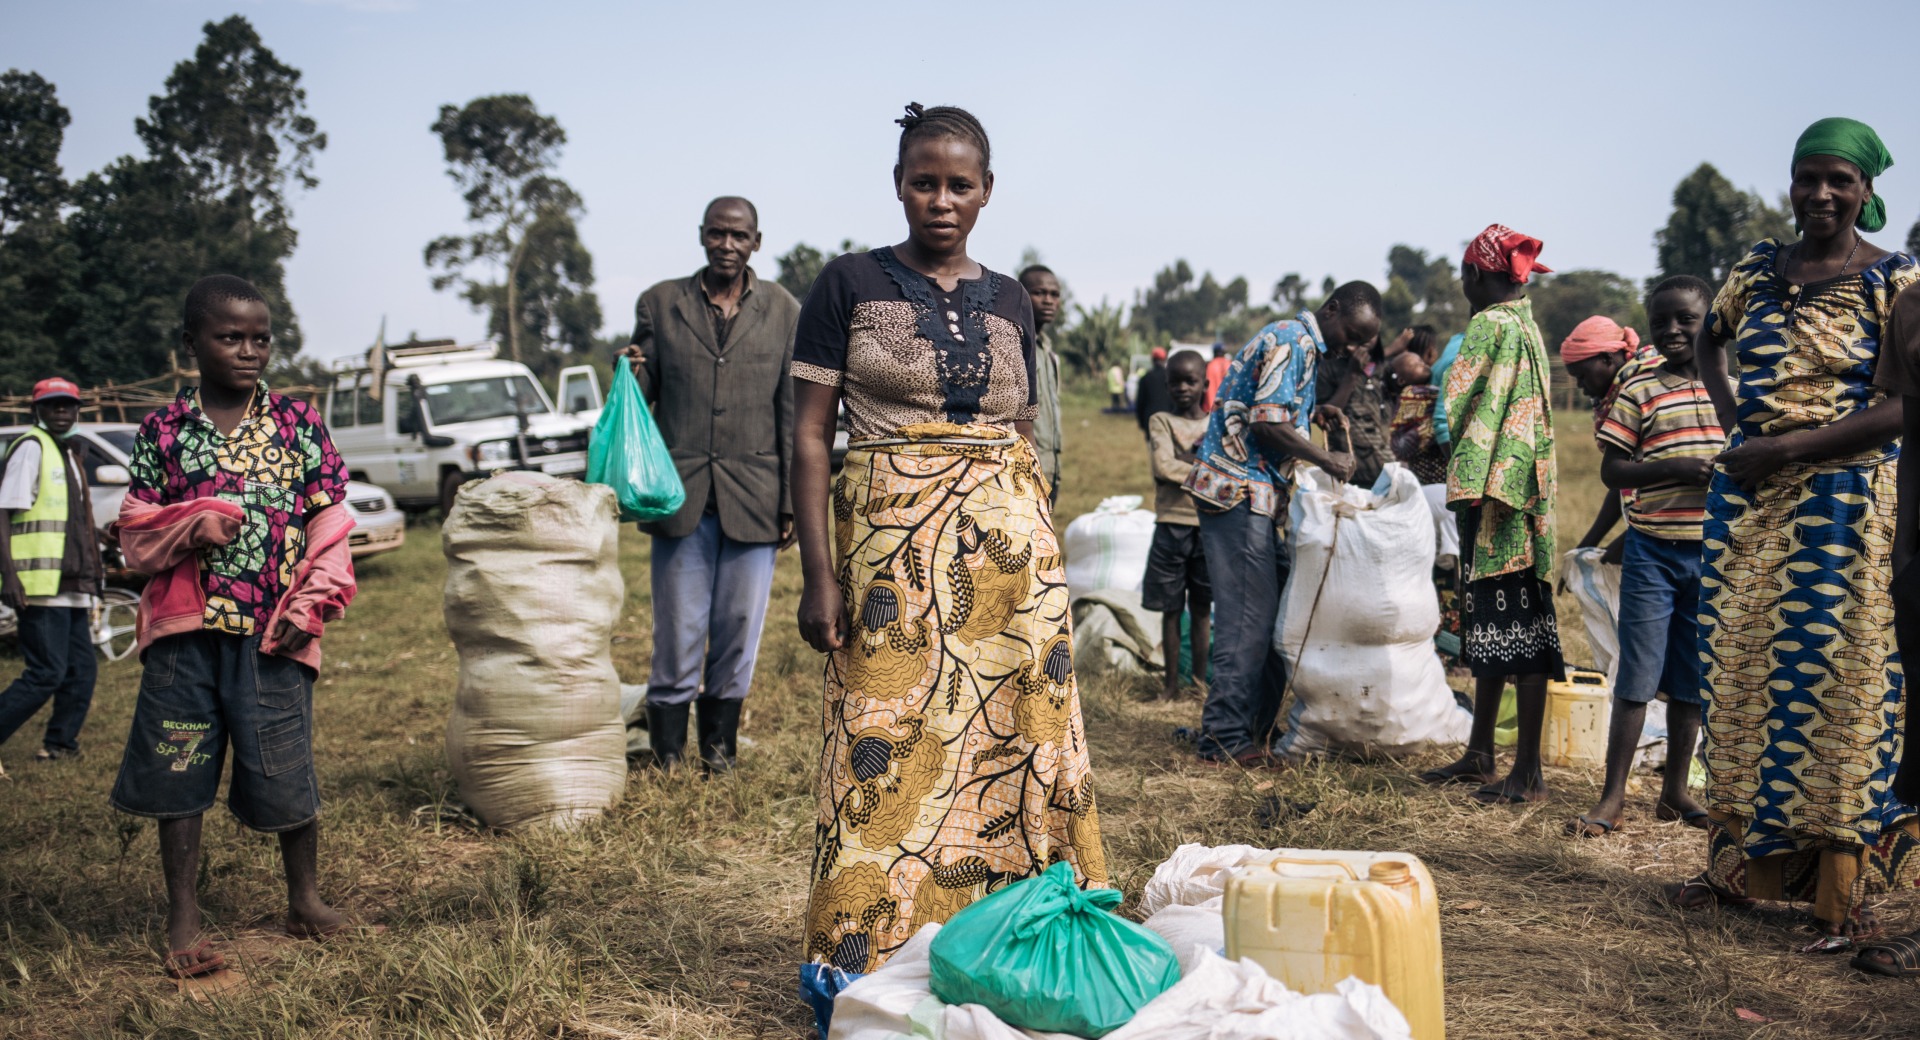 Cécile Tabo Mapamadjo, 28, shops for her family with support from Action Against Hunger at the Largu Food Market, in Ituri, eastern Democratic Republic of Congo.